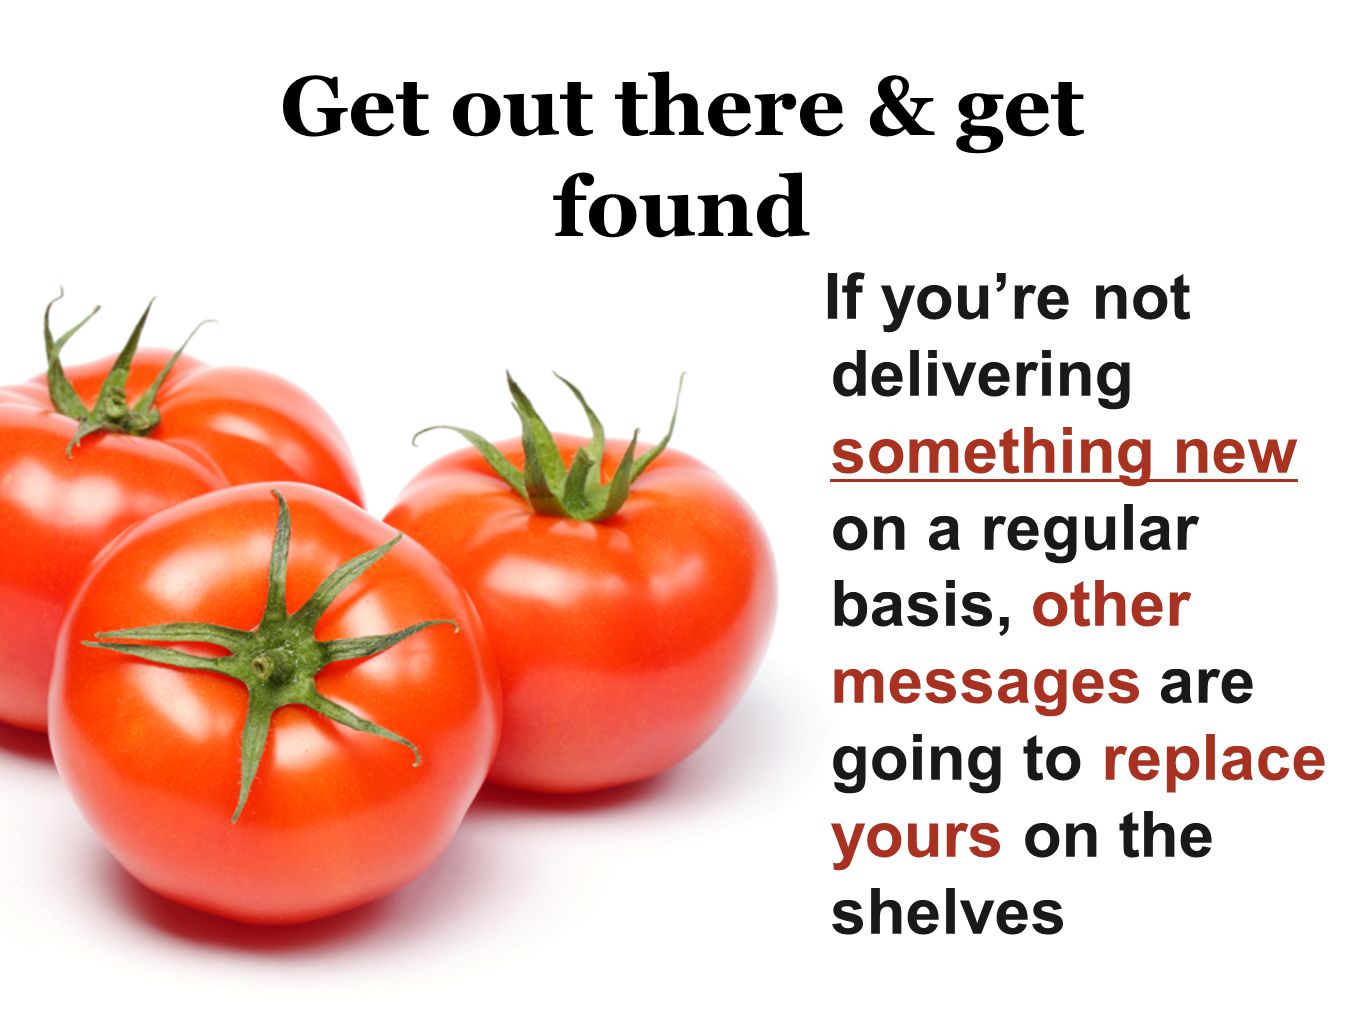 Get out there & get found If youre not delivering something new on a regular basis, other messages are going to replace yours on the shelves